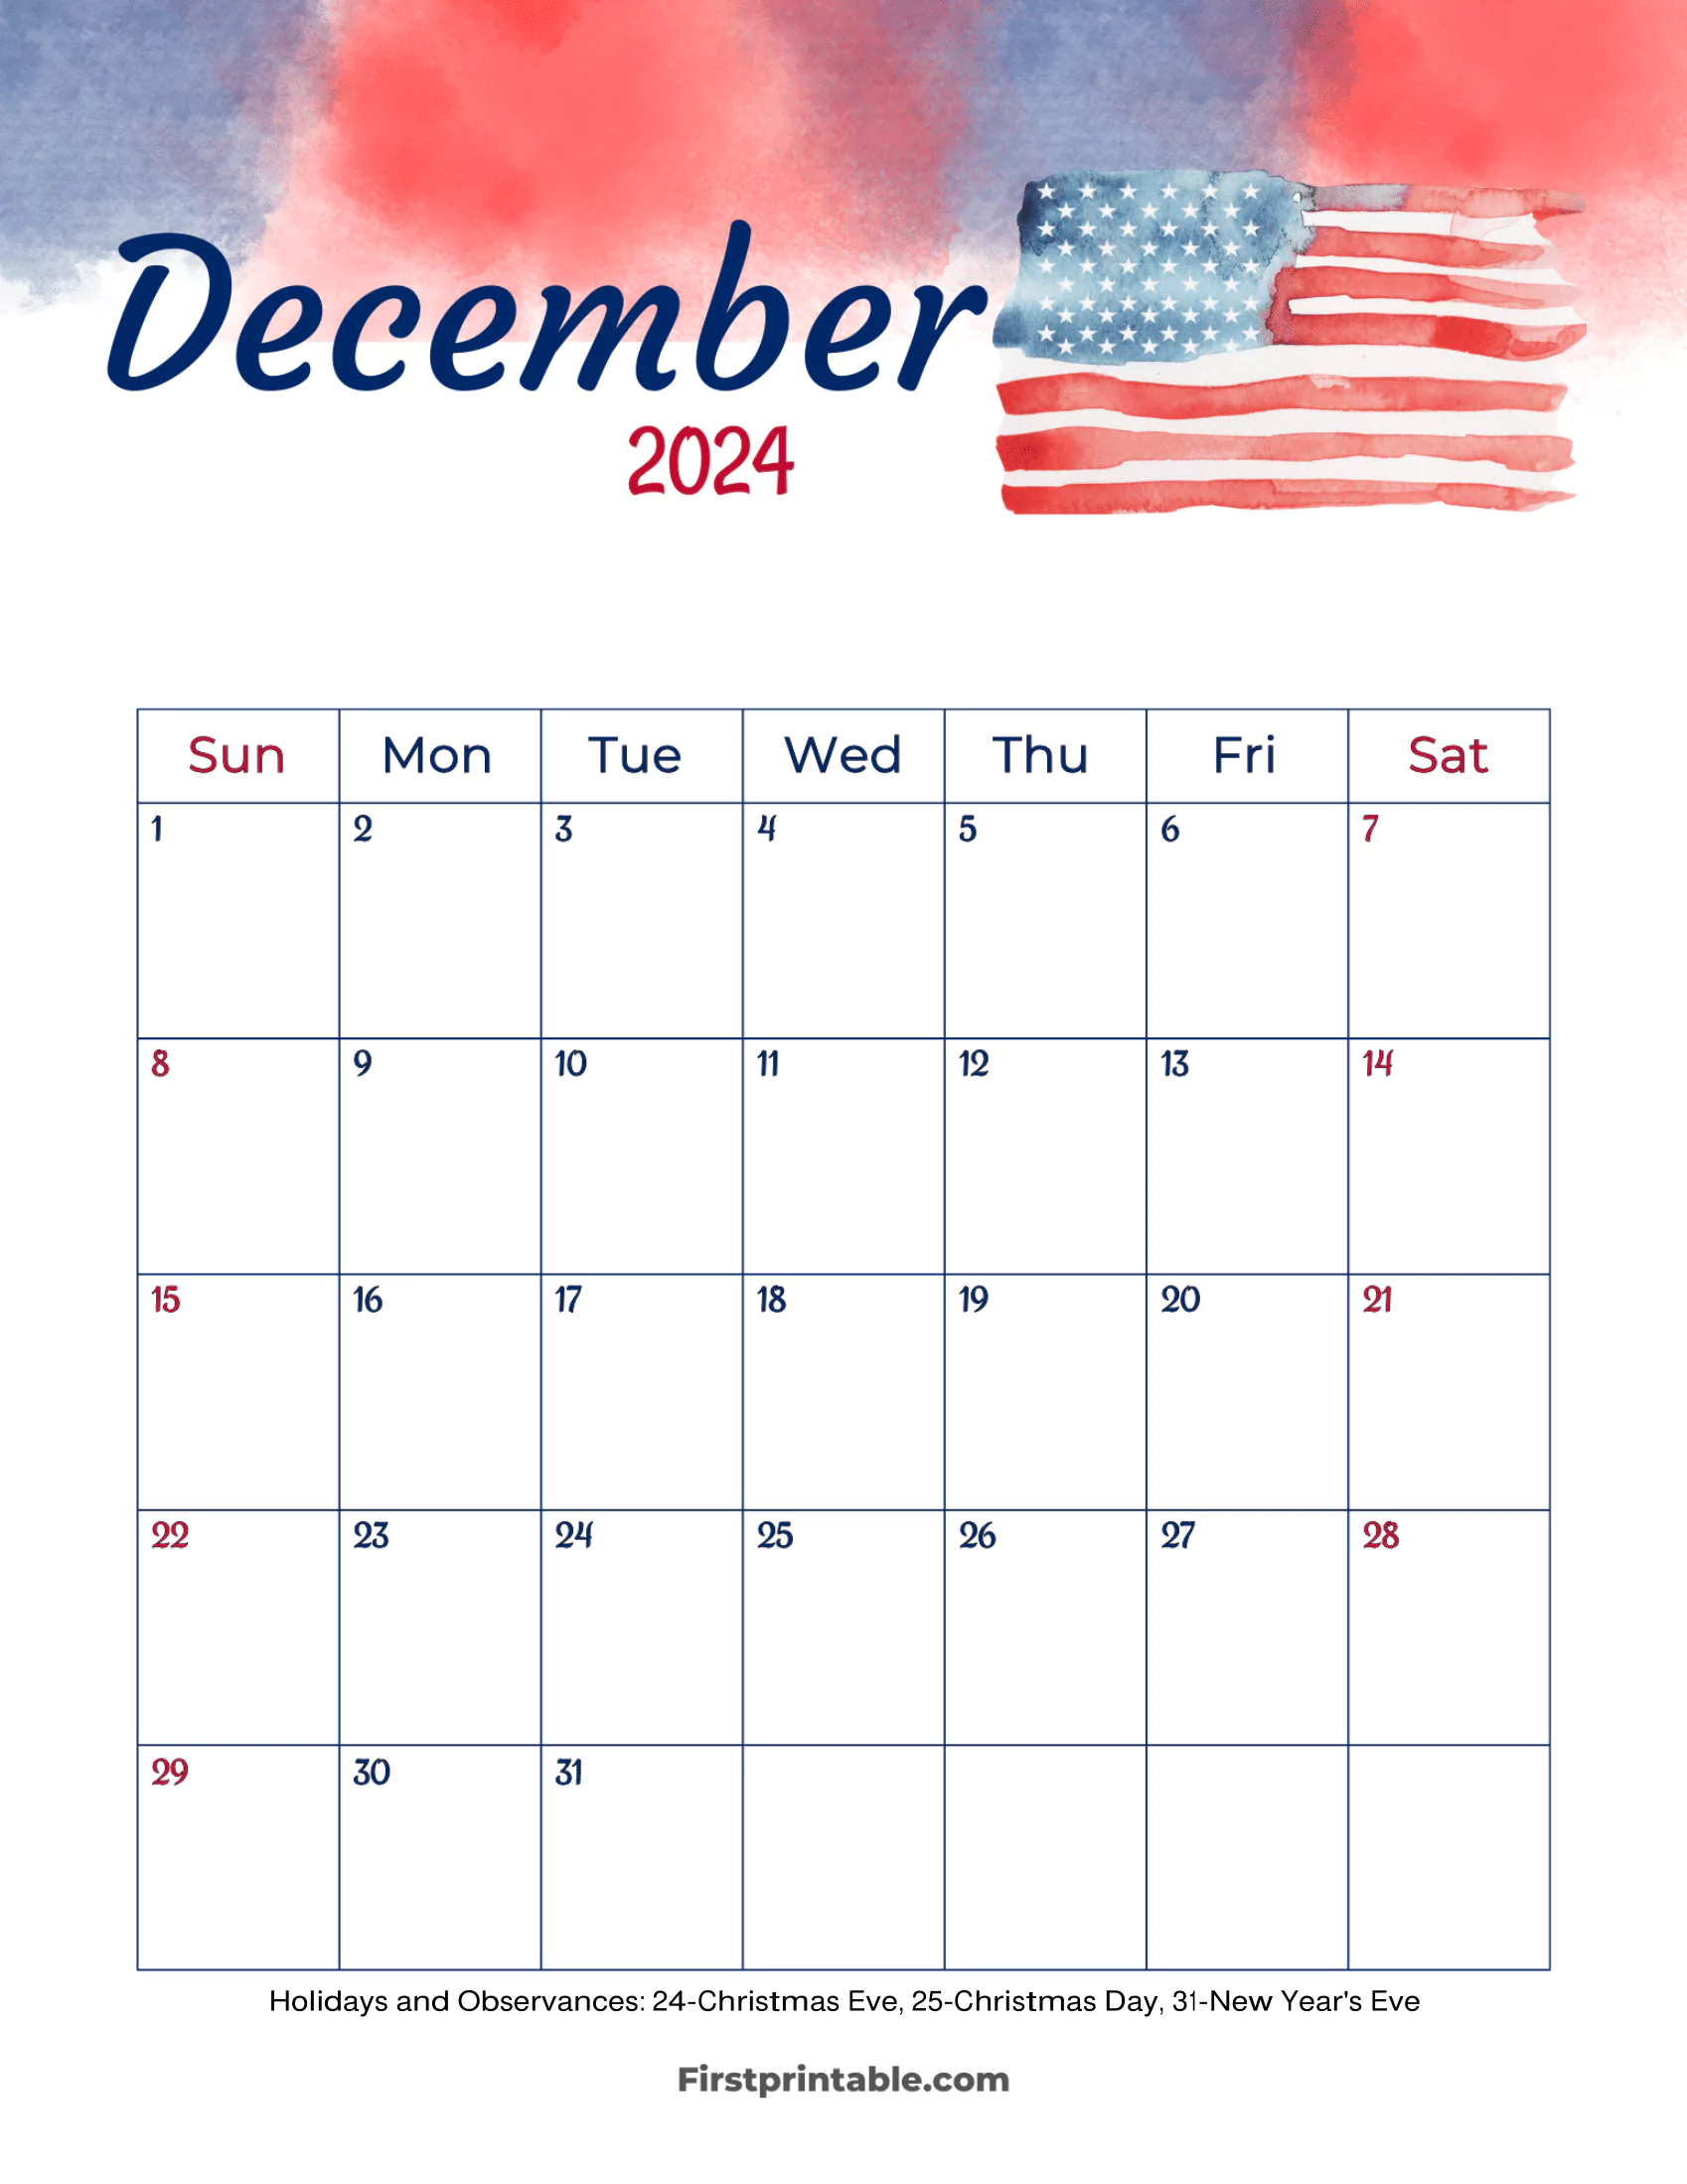 December Calendar 2024 Printable & Fillable with US Holidays